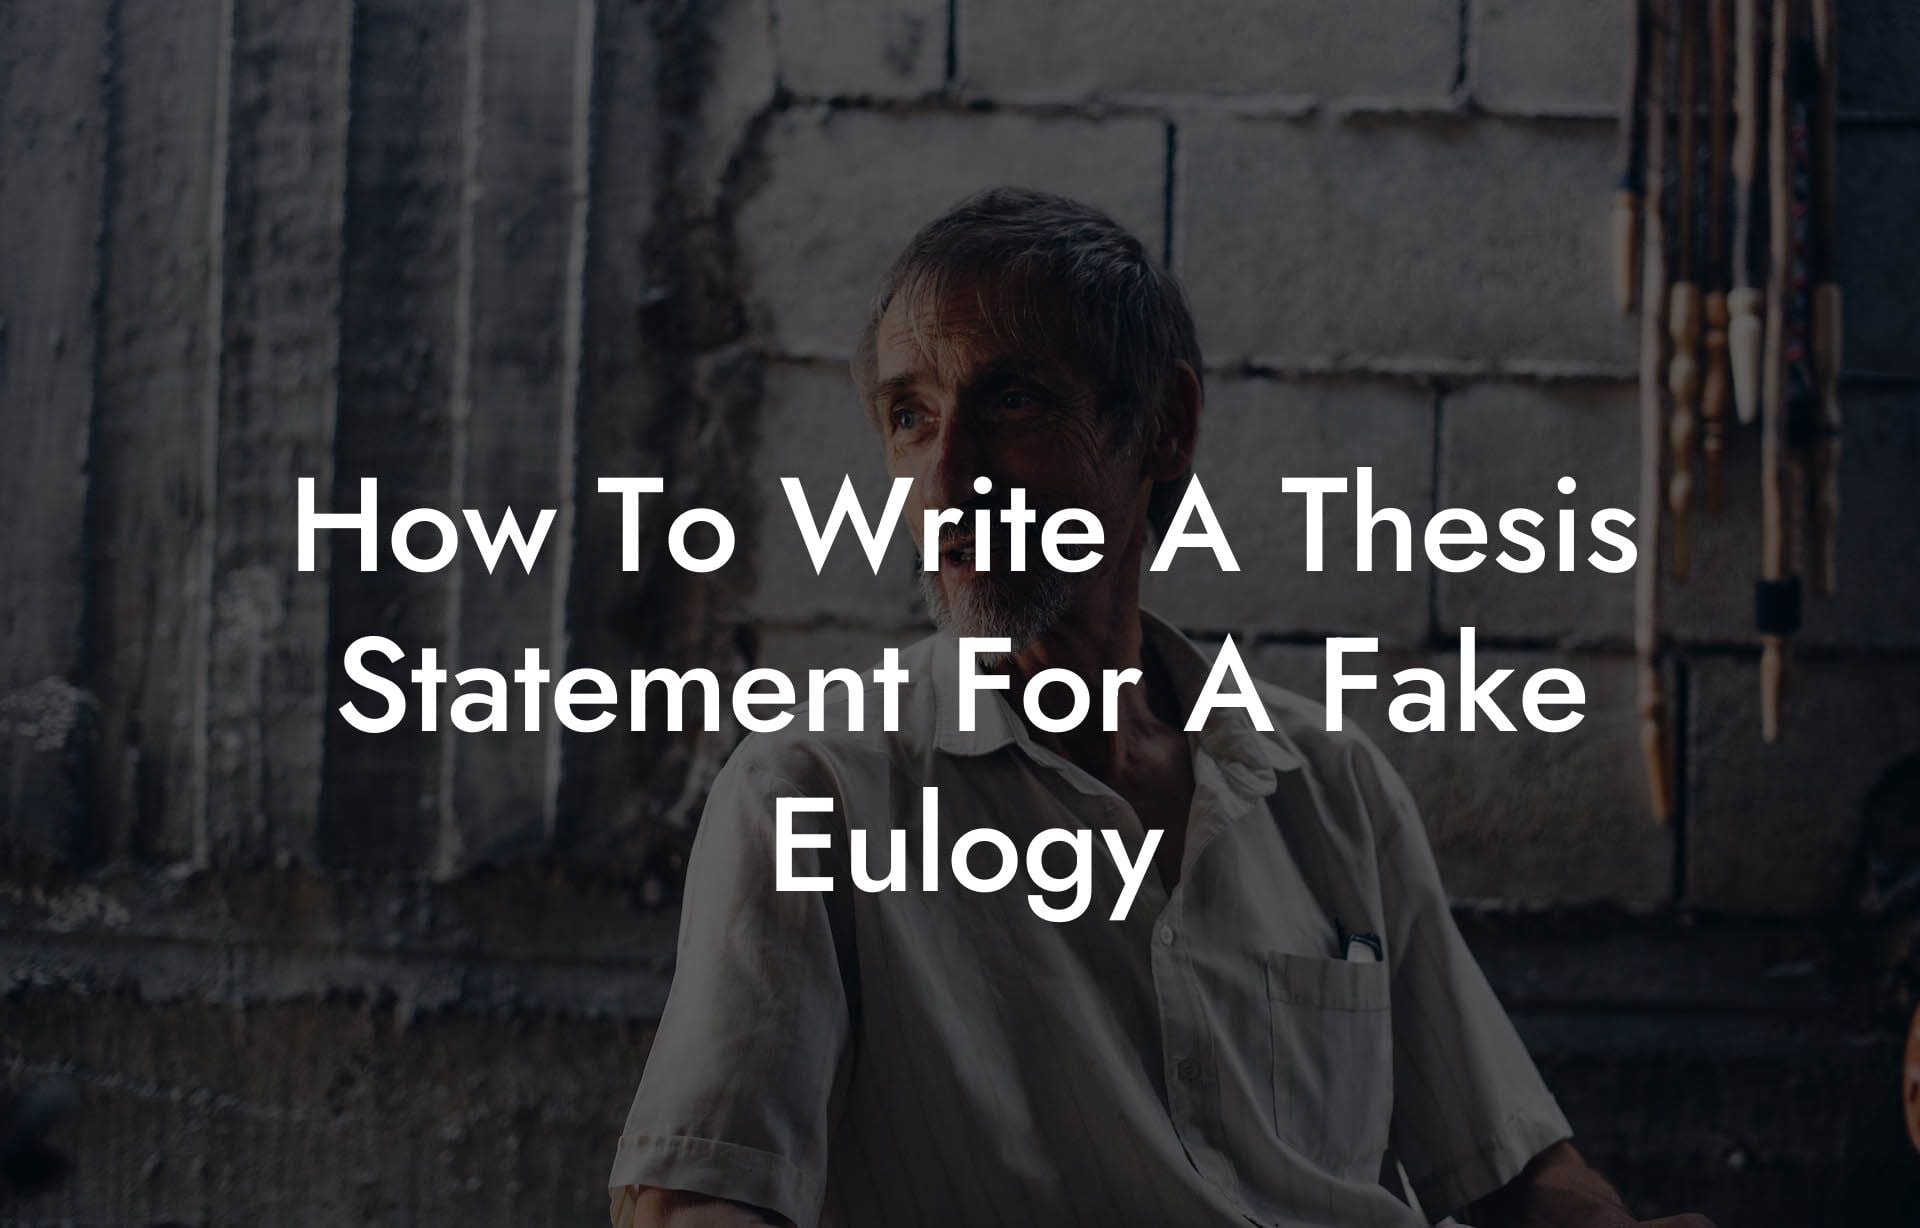 How To Write A Thesis Statement For A Fake Eulogy